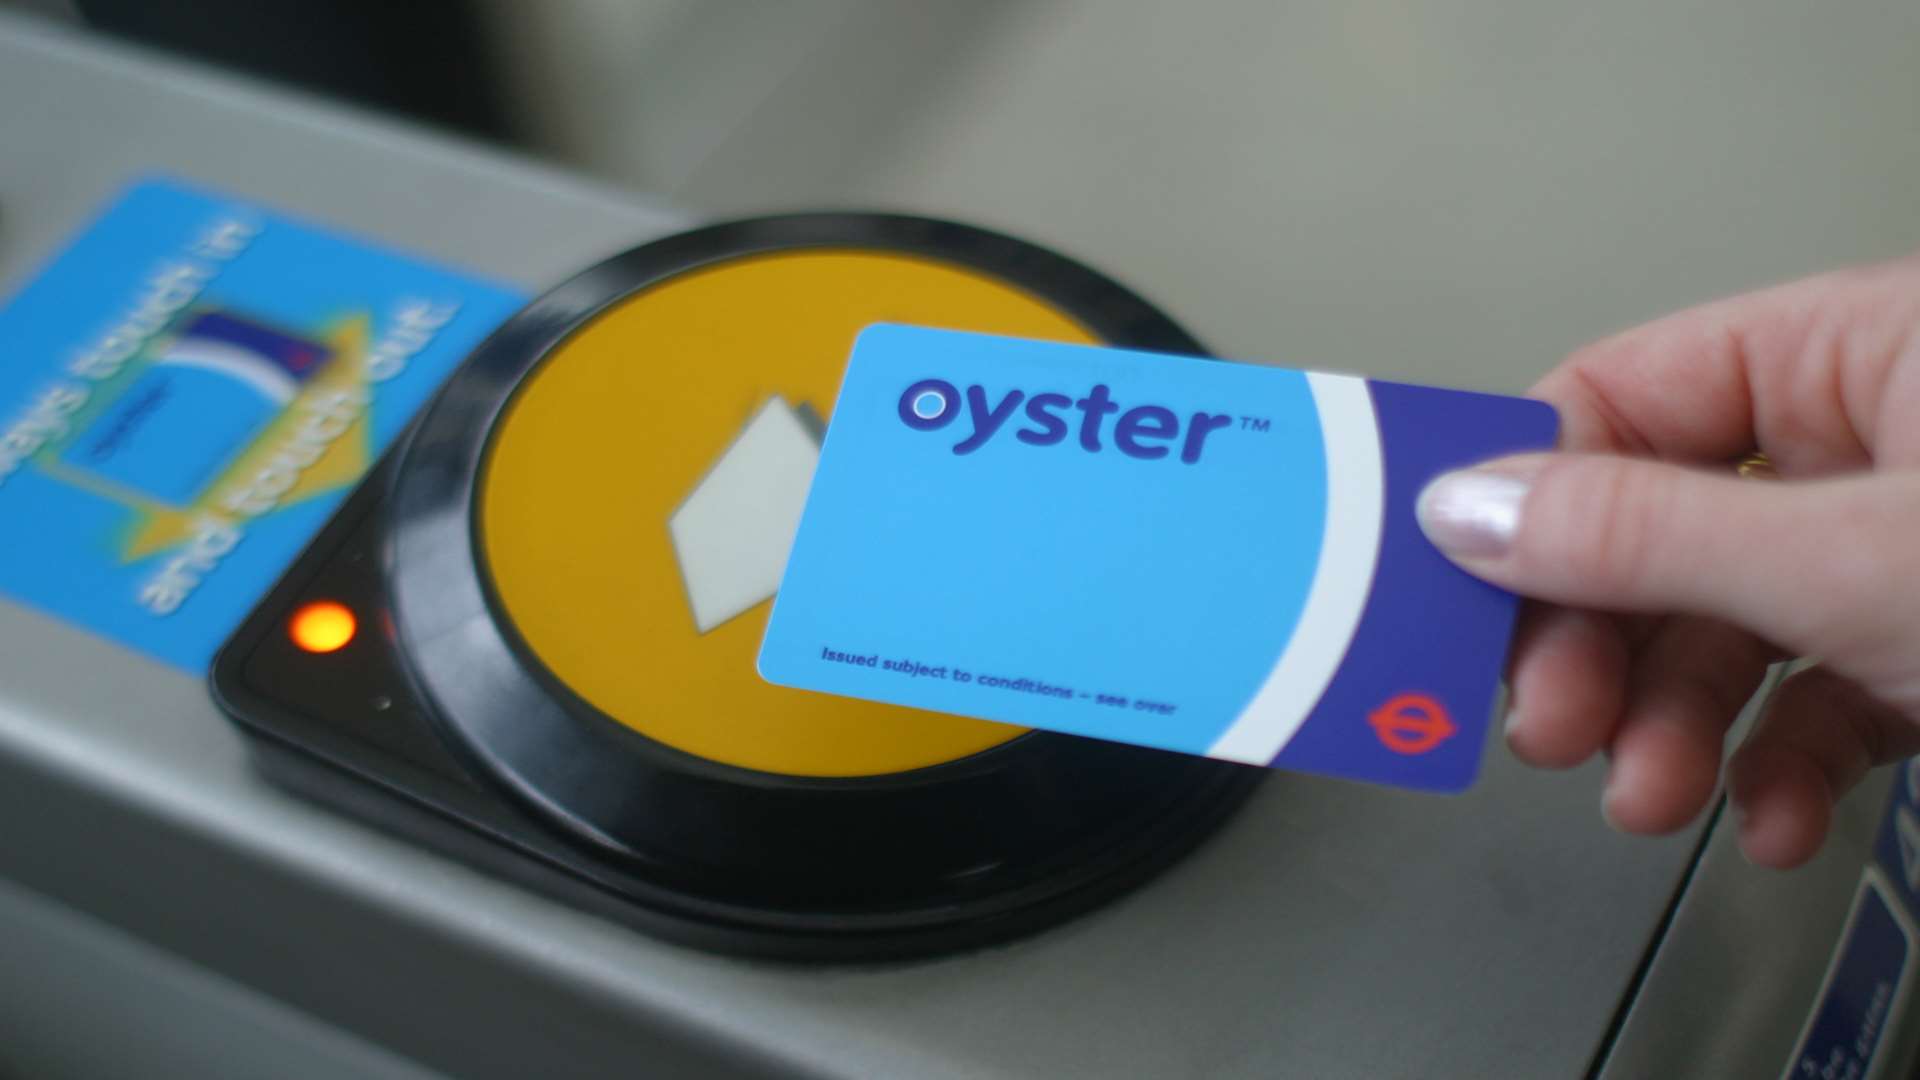 Kent's new 'Oyster' style card can be used from today